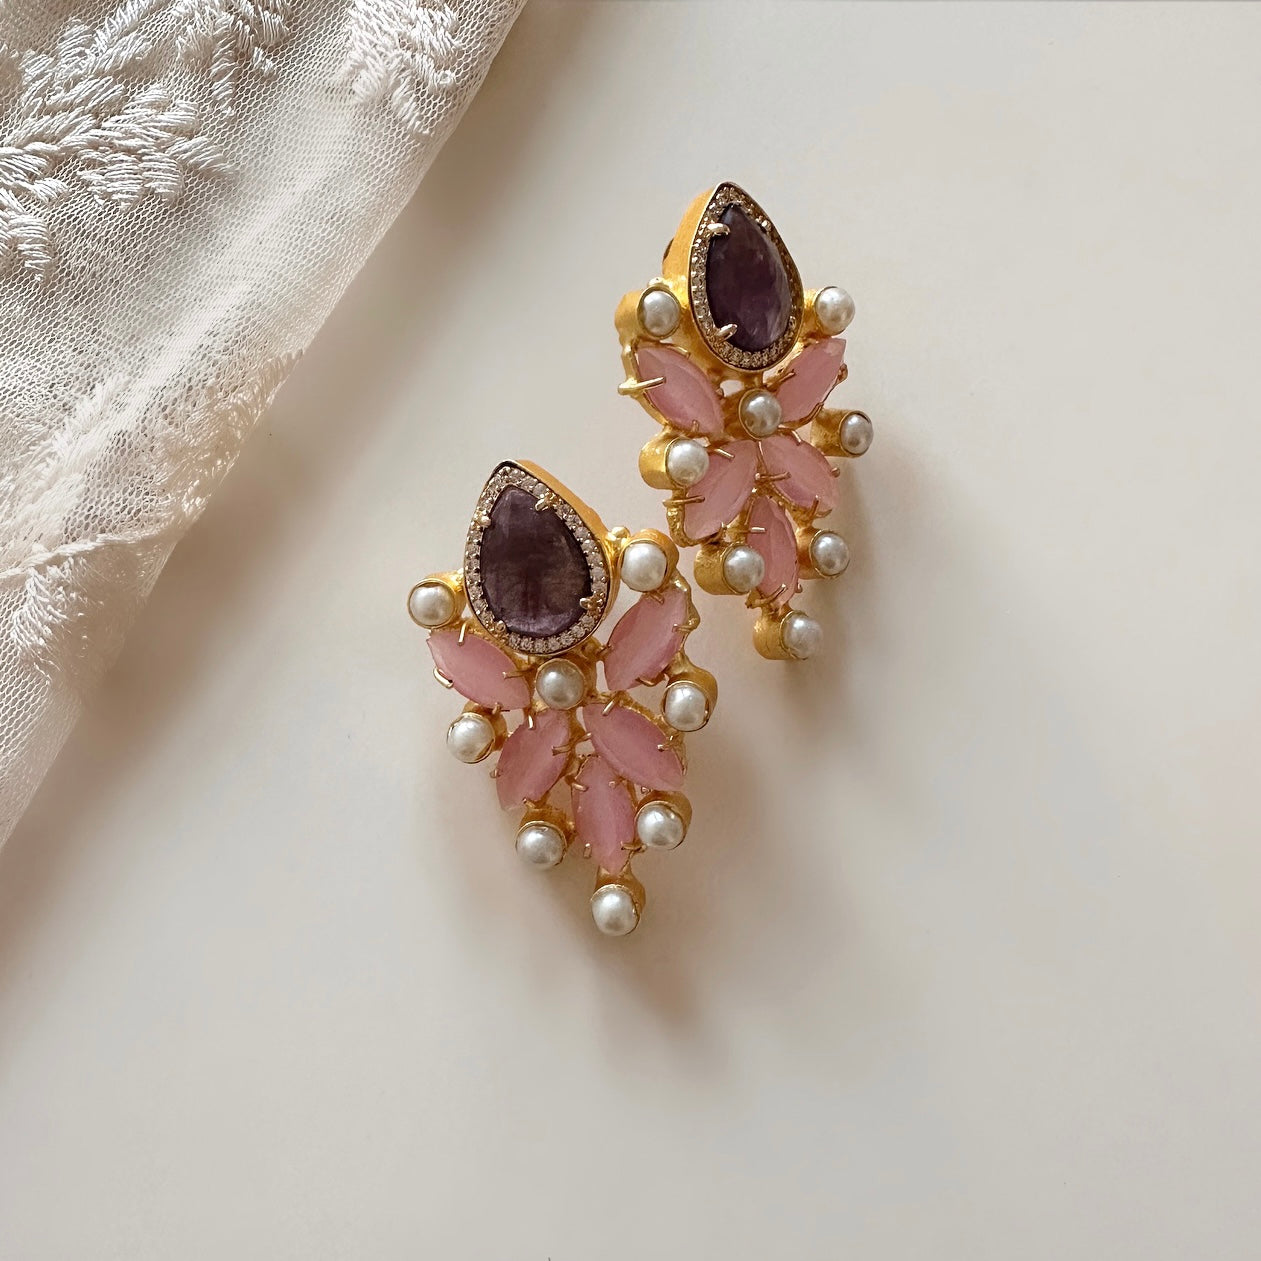 Indulge in the vibrant beauty of our Malibu Purple Pink Earrings. With stunning hues of purple and pink, these earrings are sure to add a pop of color to any outfit. Elevate your style and make a bold statement with these eye-catching earrings. Upgrade your jewelry collection today!